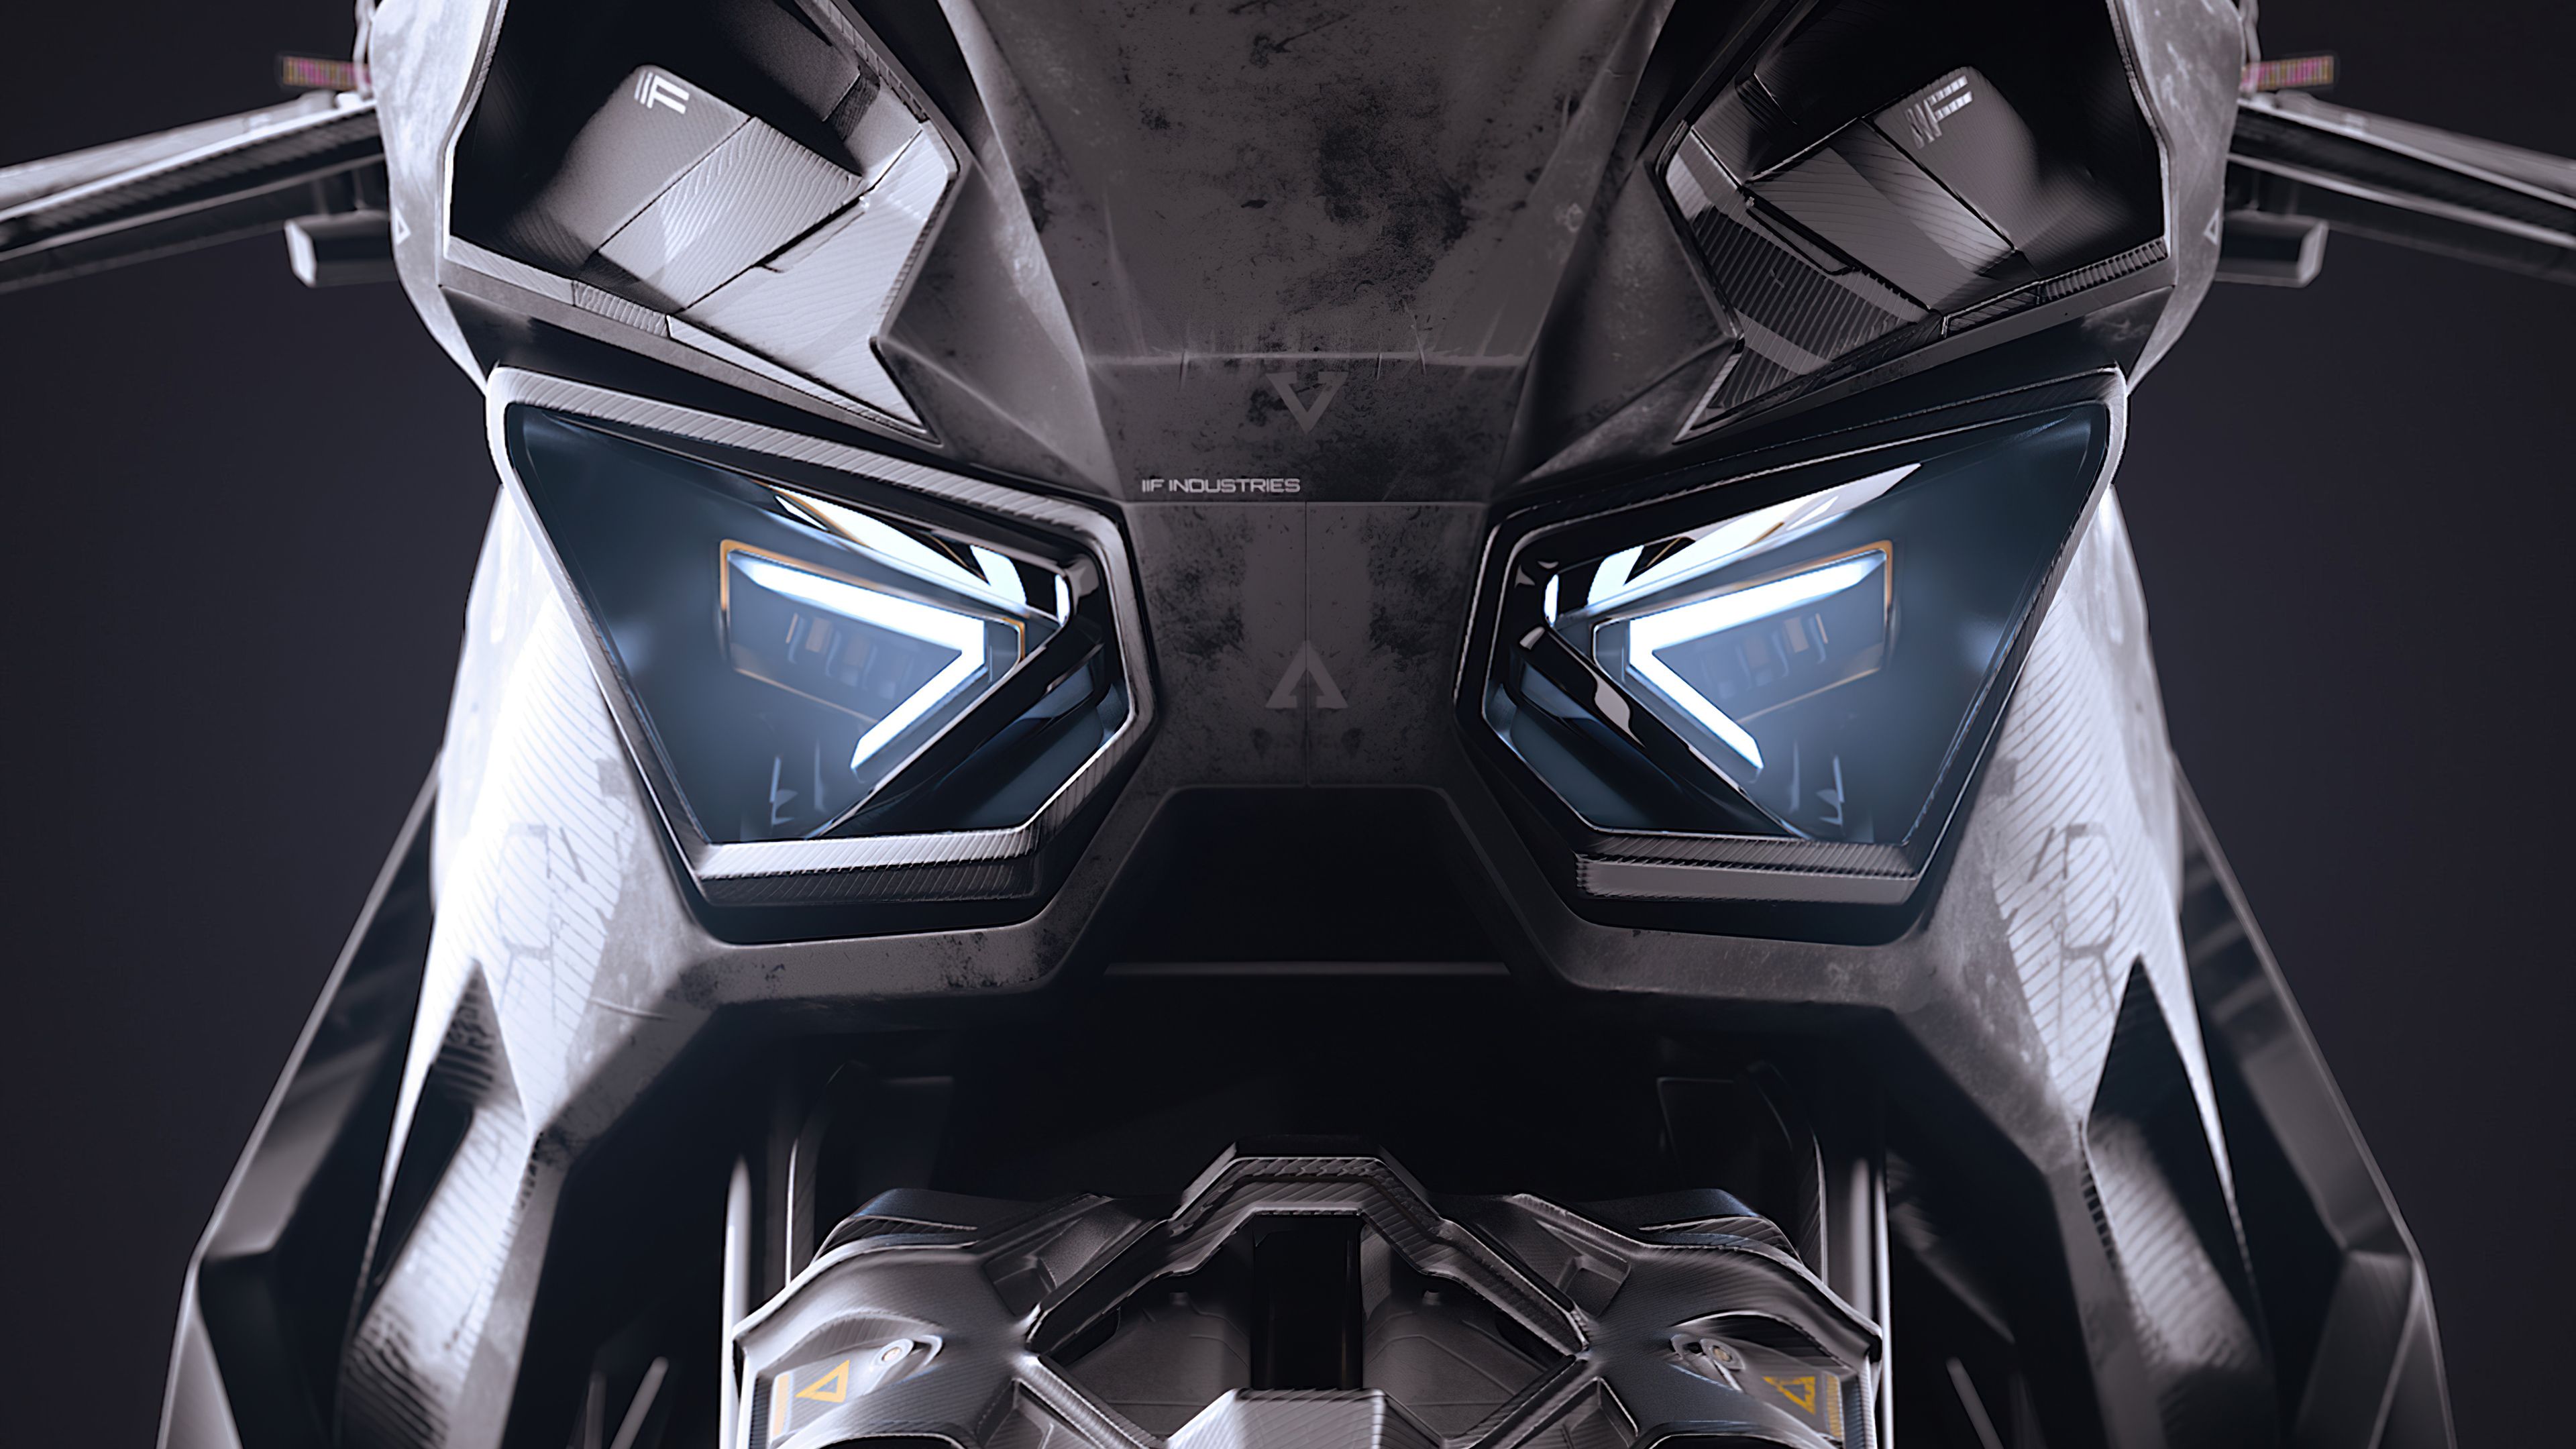 Scifi Bike Headlights 4k, HD Artist, 4k Wallpaper, Image, Background, Photo and Picture